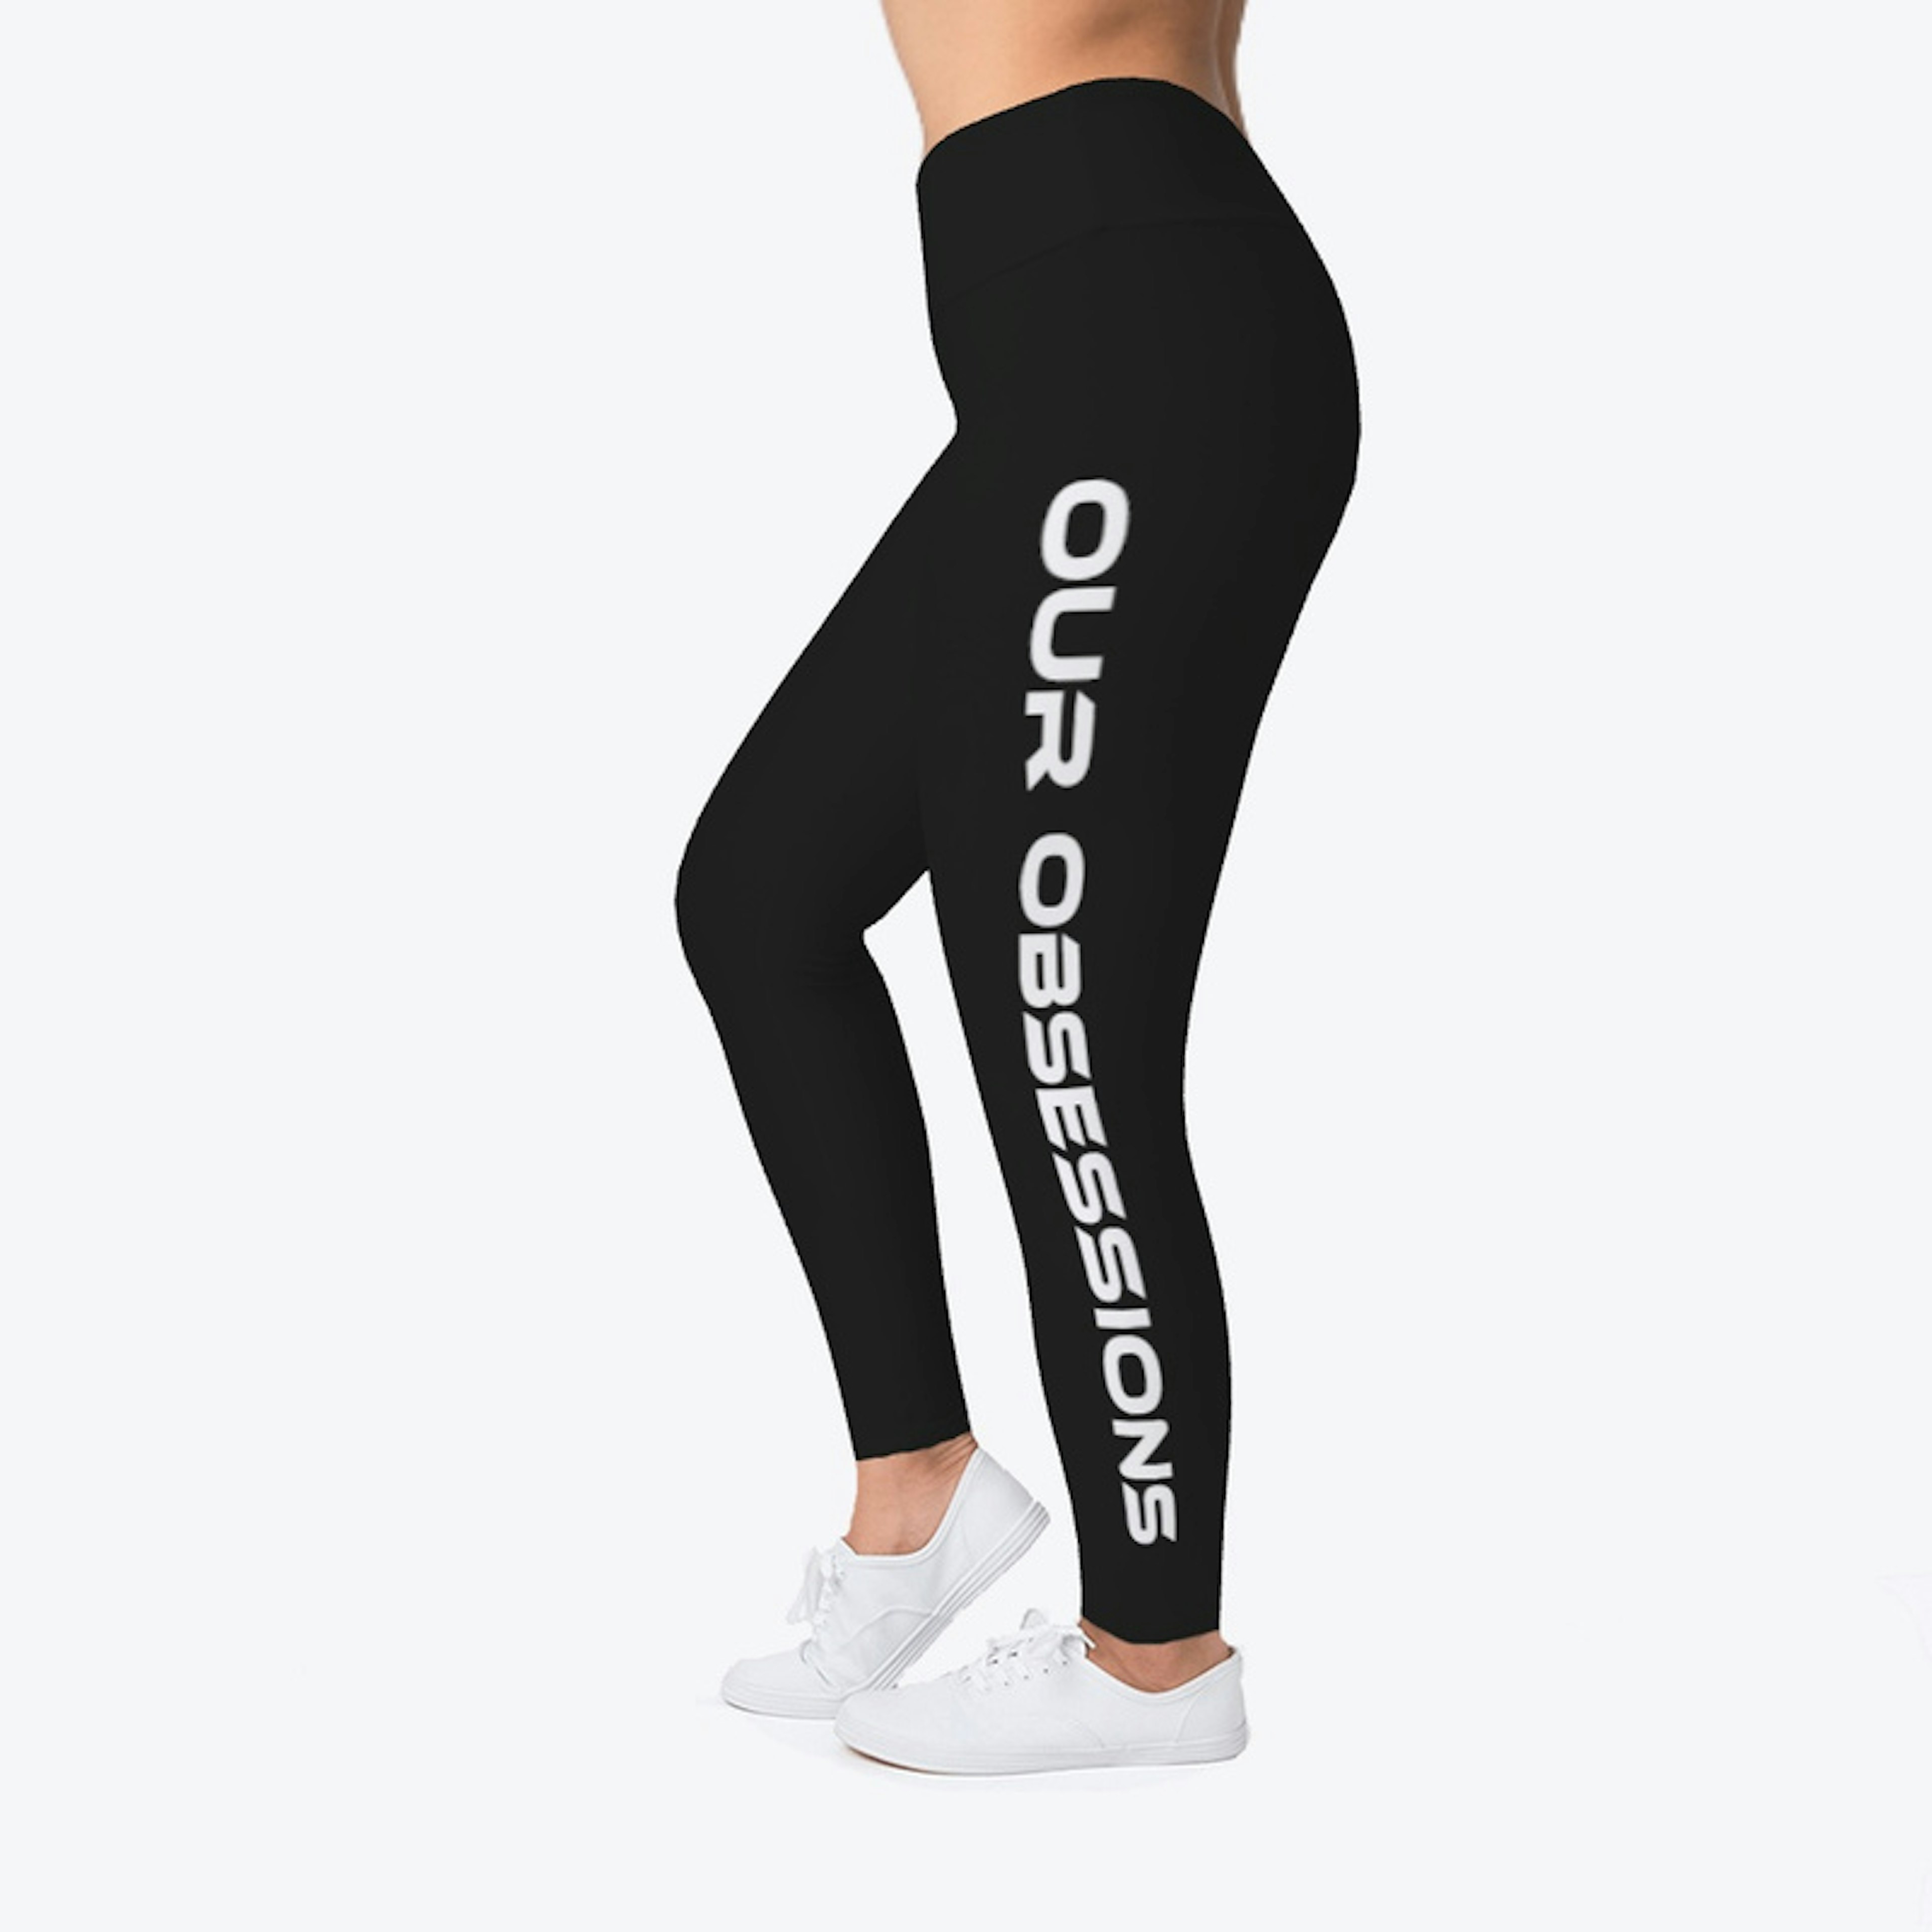 Our Obsessions Leggins - Black